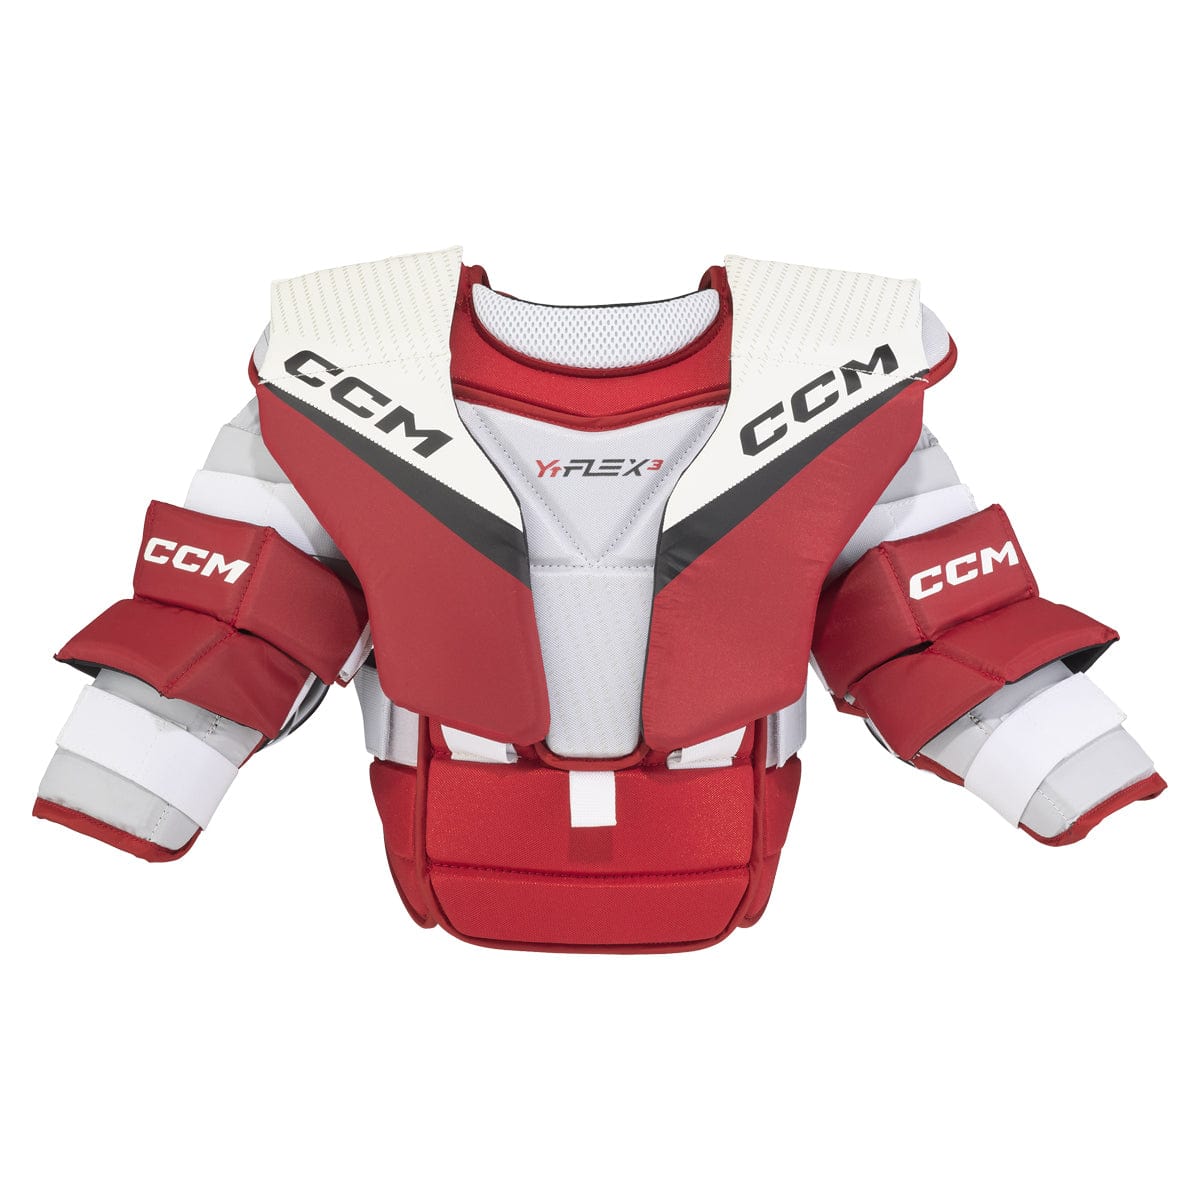 CCM YTFlex 3 Youth Chest & Arm Protector - The Hockey Shop Source For Sports